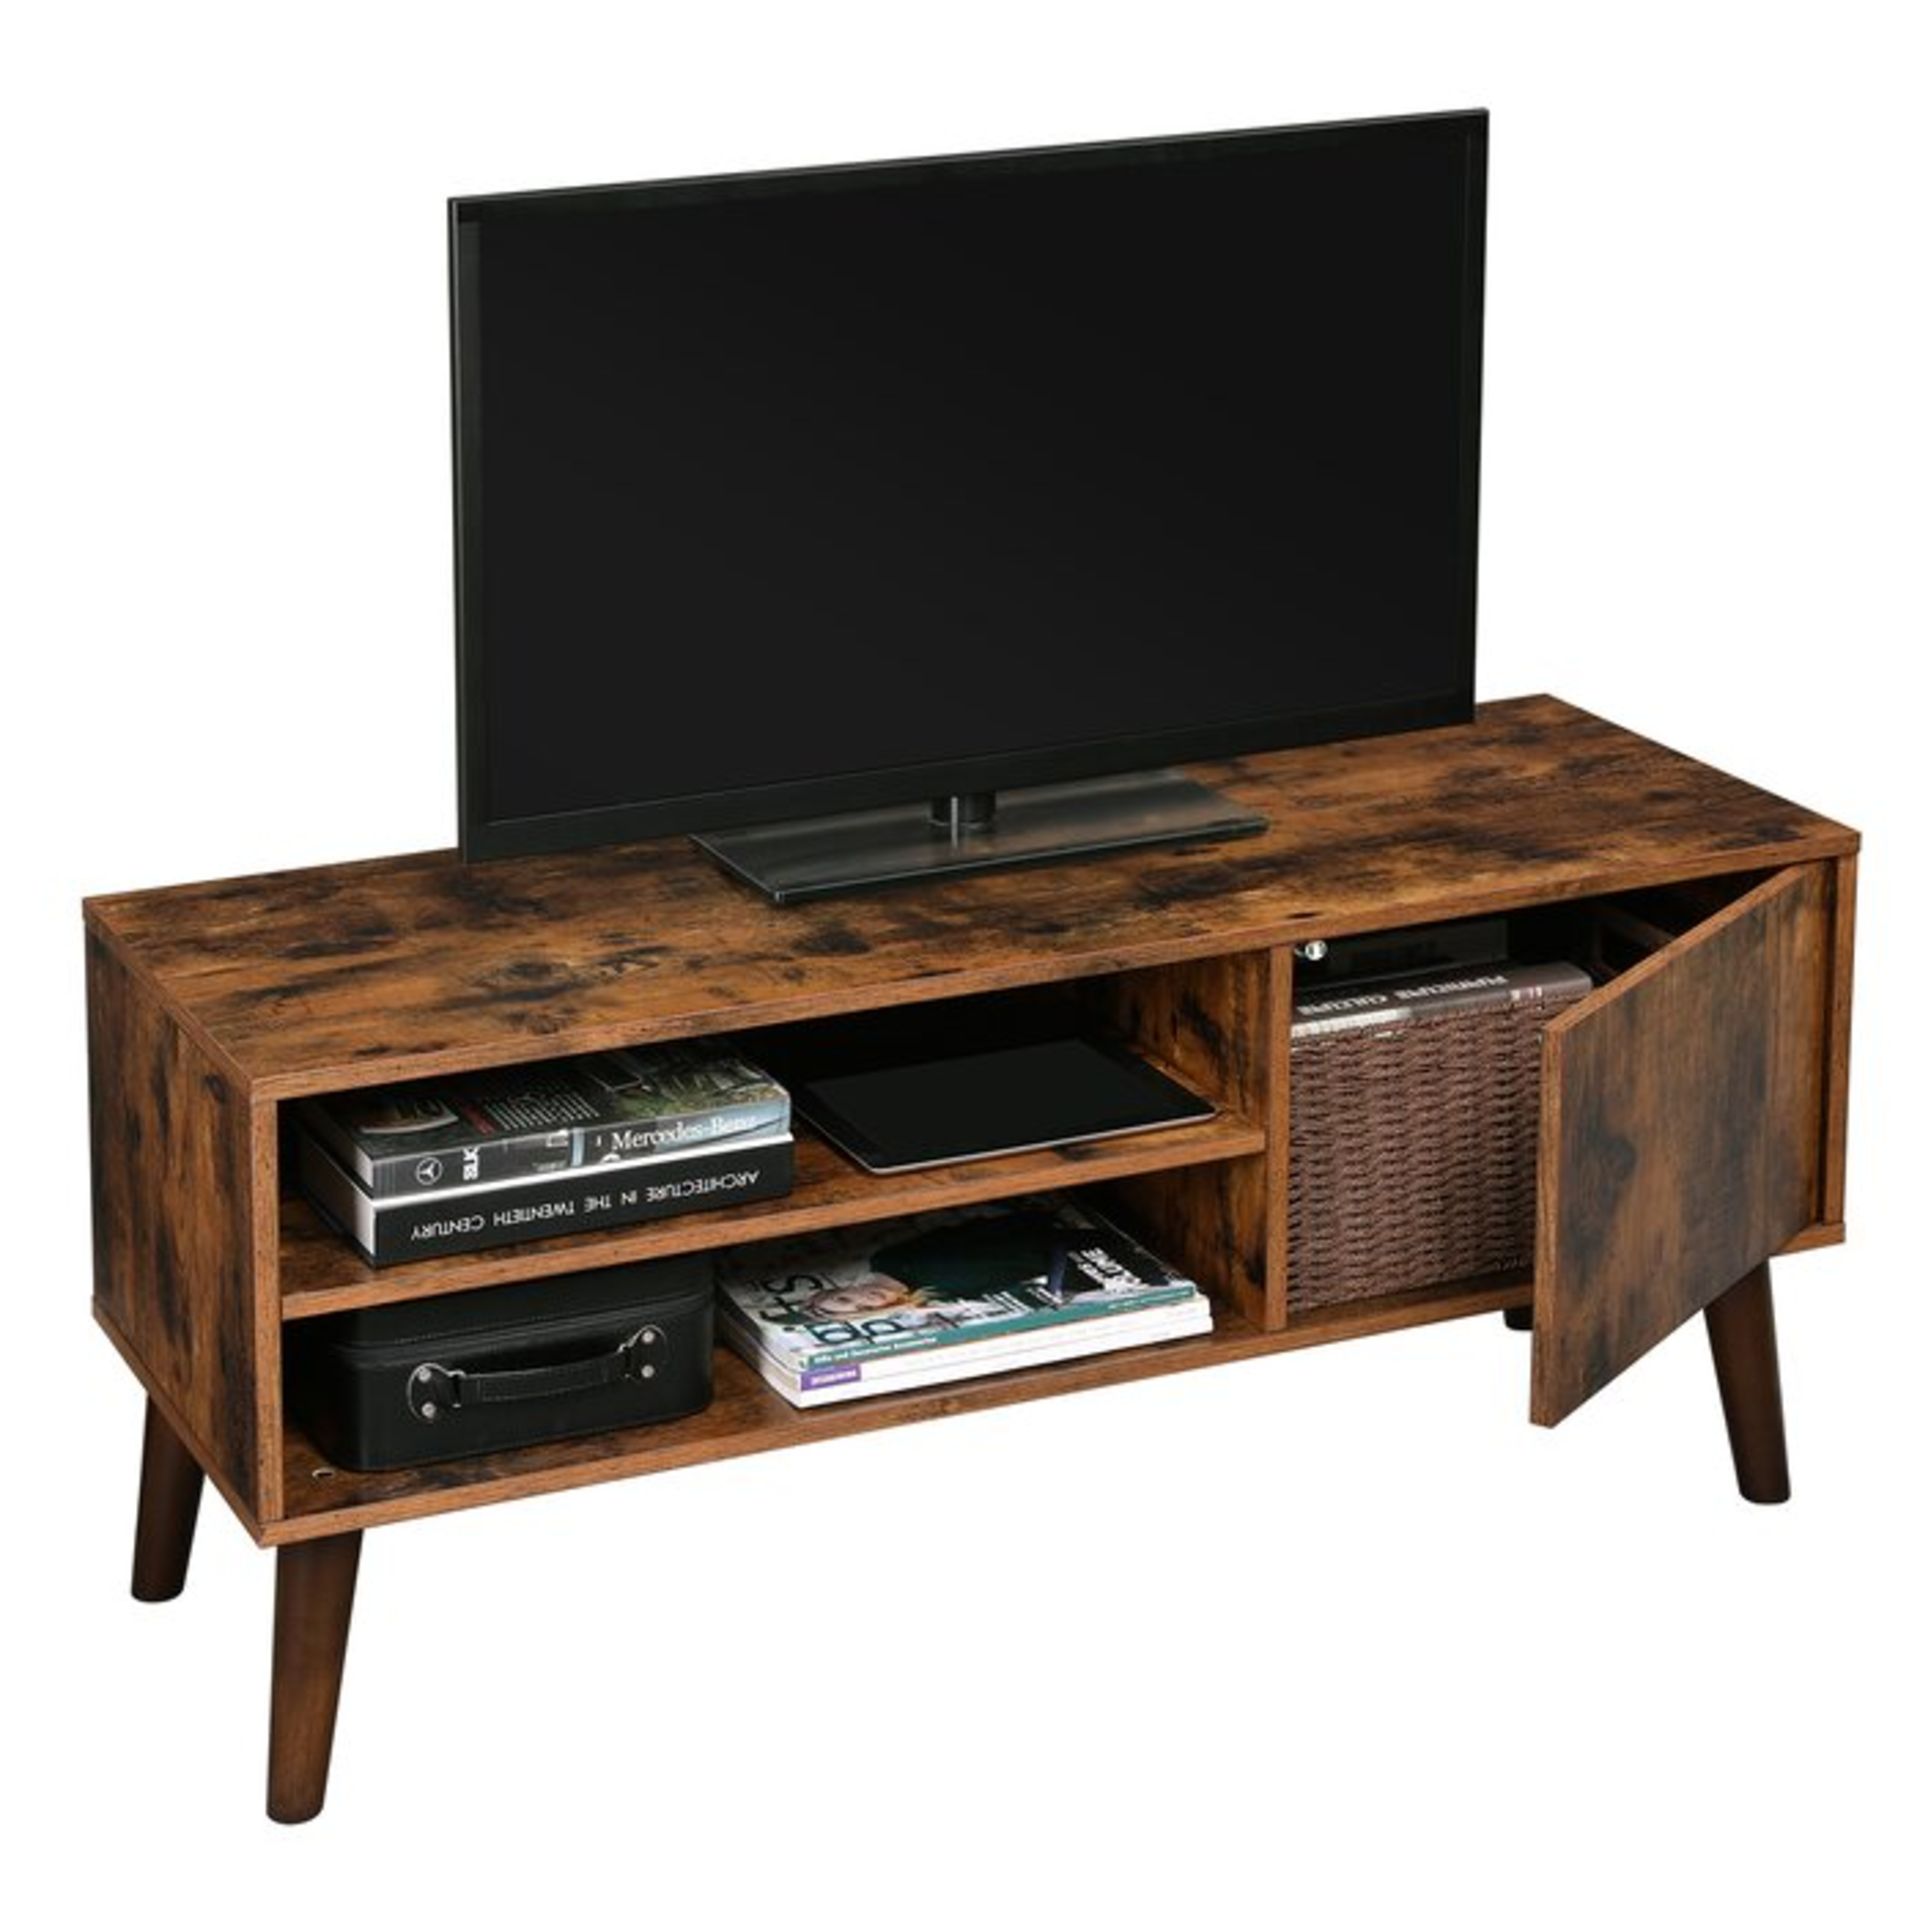 Bliss TV Stand for TVs up to 43" - RRP £97.99 - Image 2 of 3